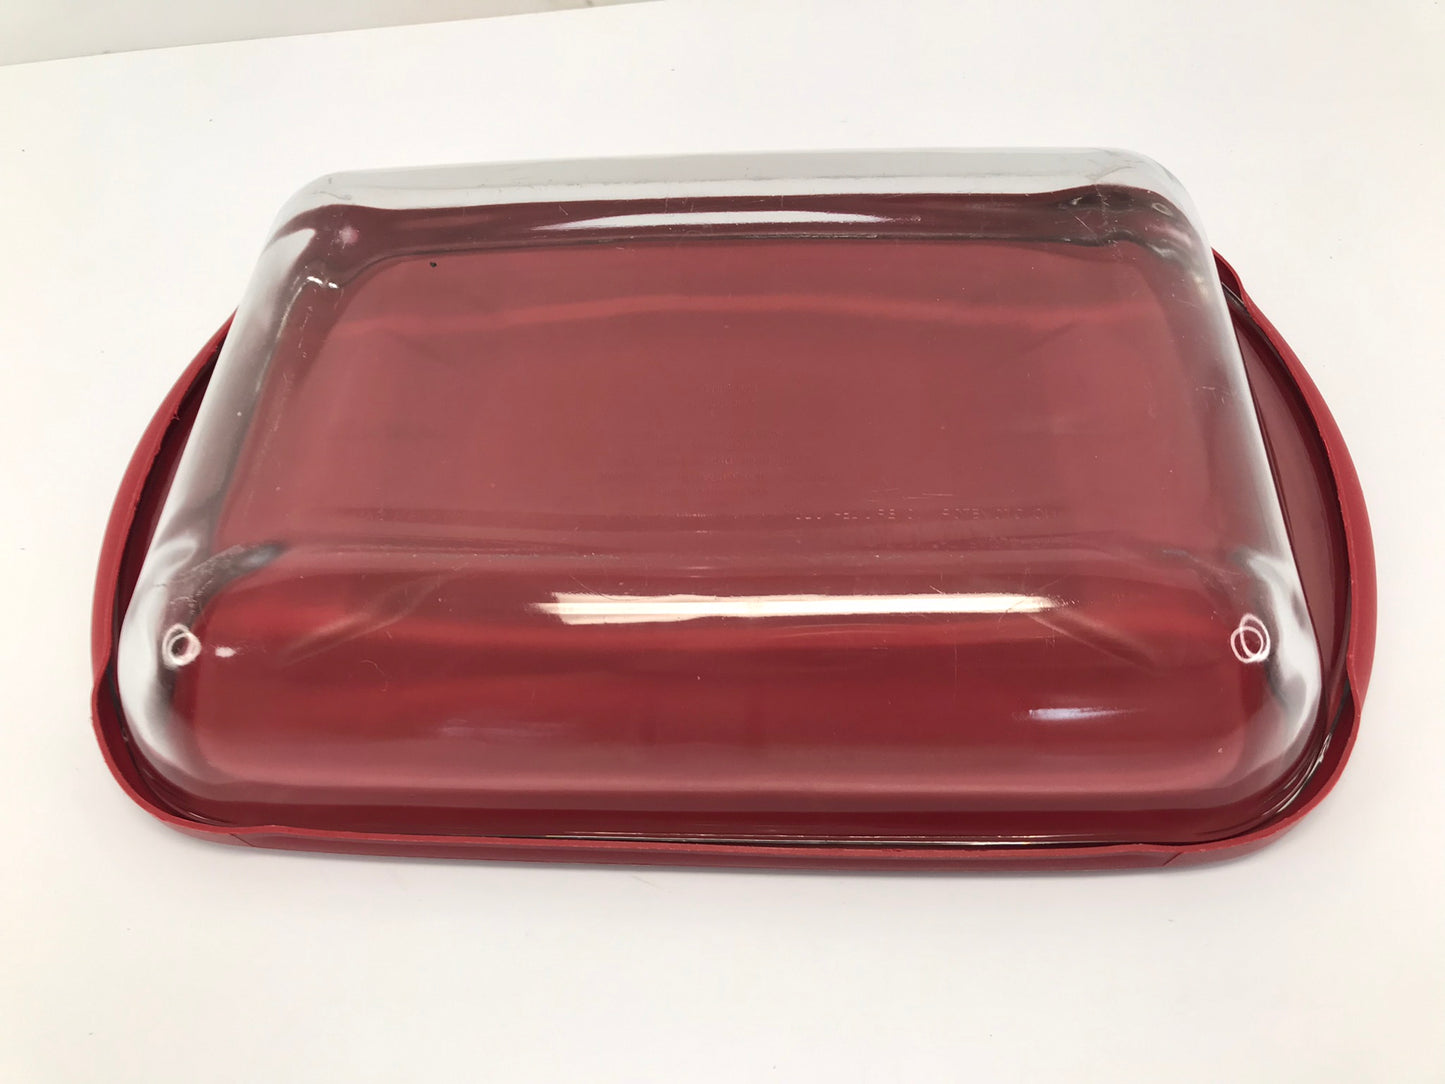 Anchor Hocking Oblong Glass Baking Dish With Lid 9x13 As New